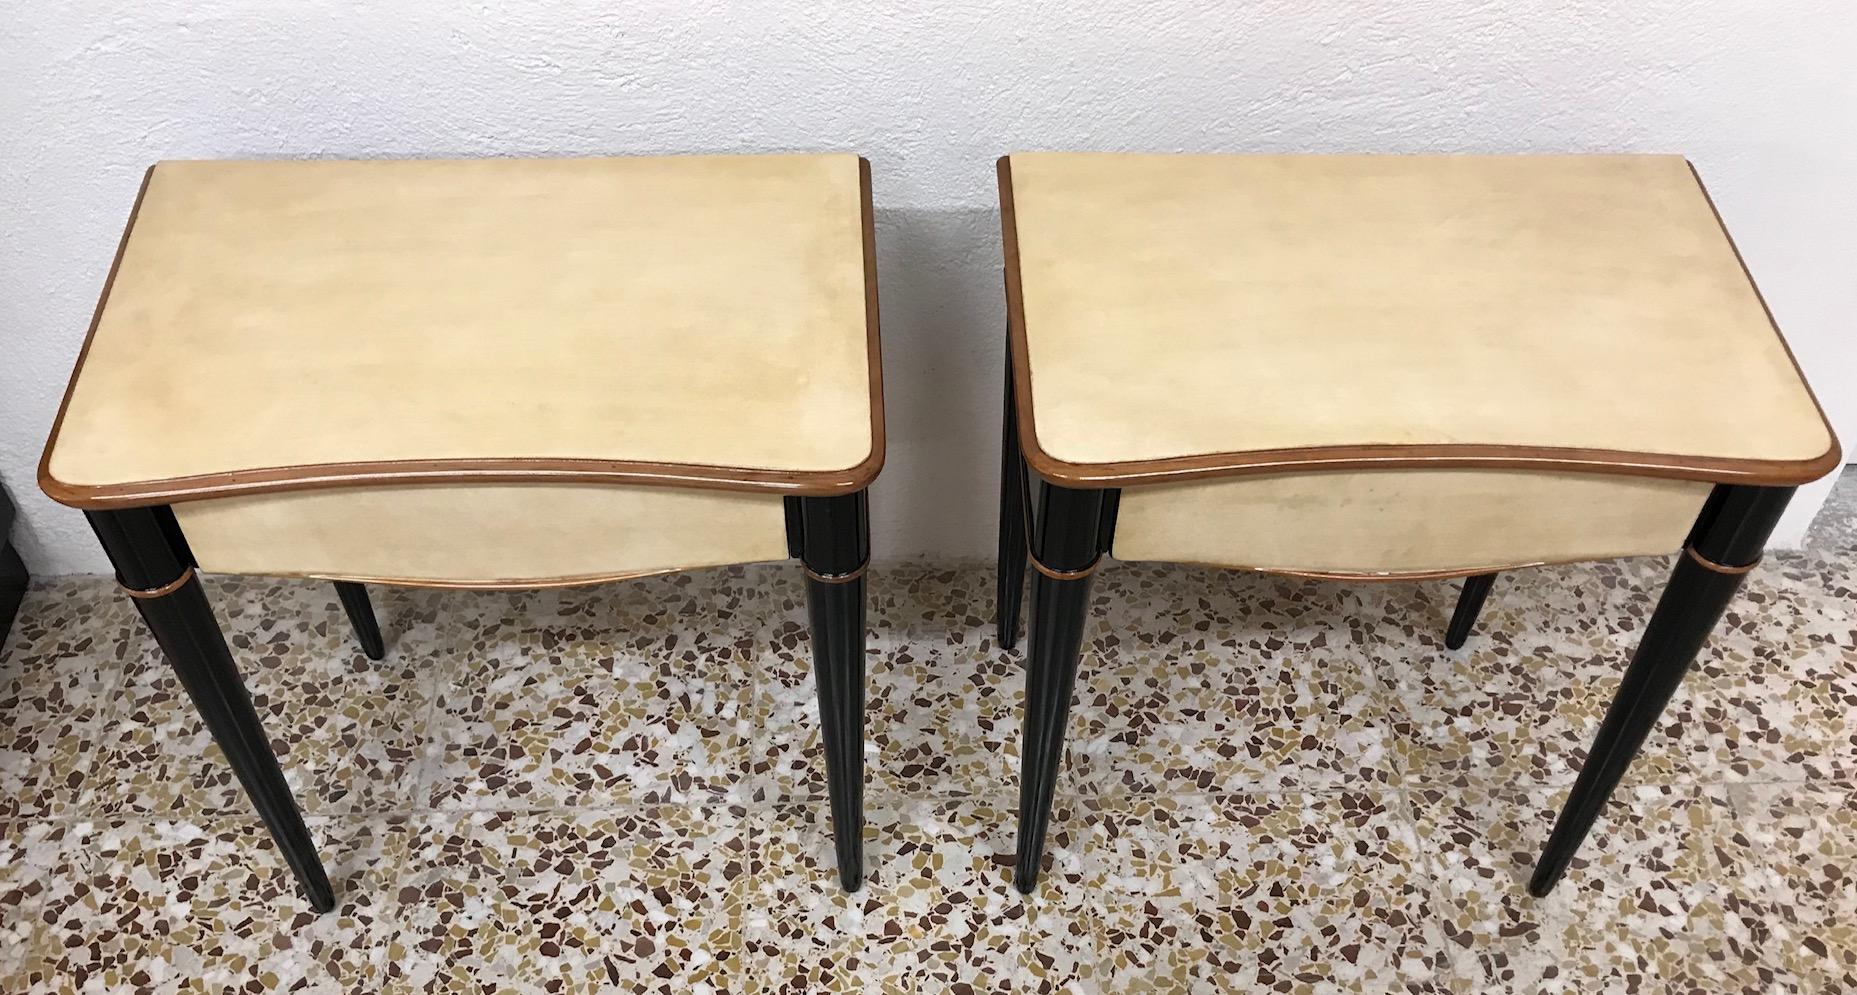 Pair of Italian Art Deco Maple and Parchment Nightstands, 1940s (Art déco)